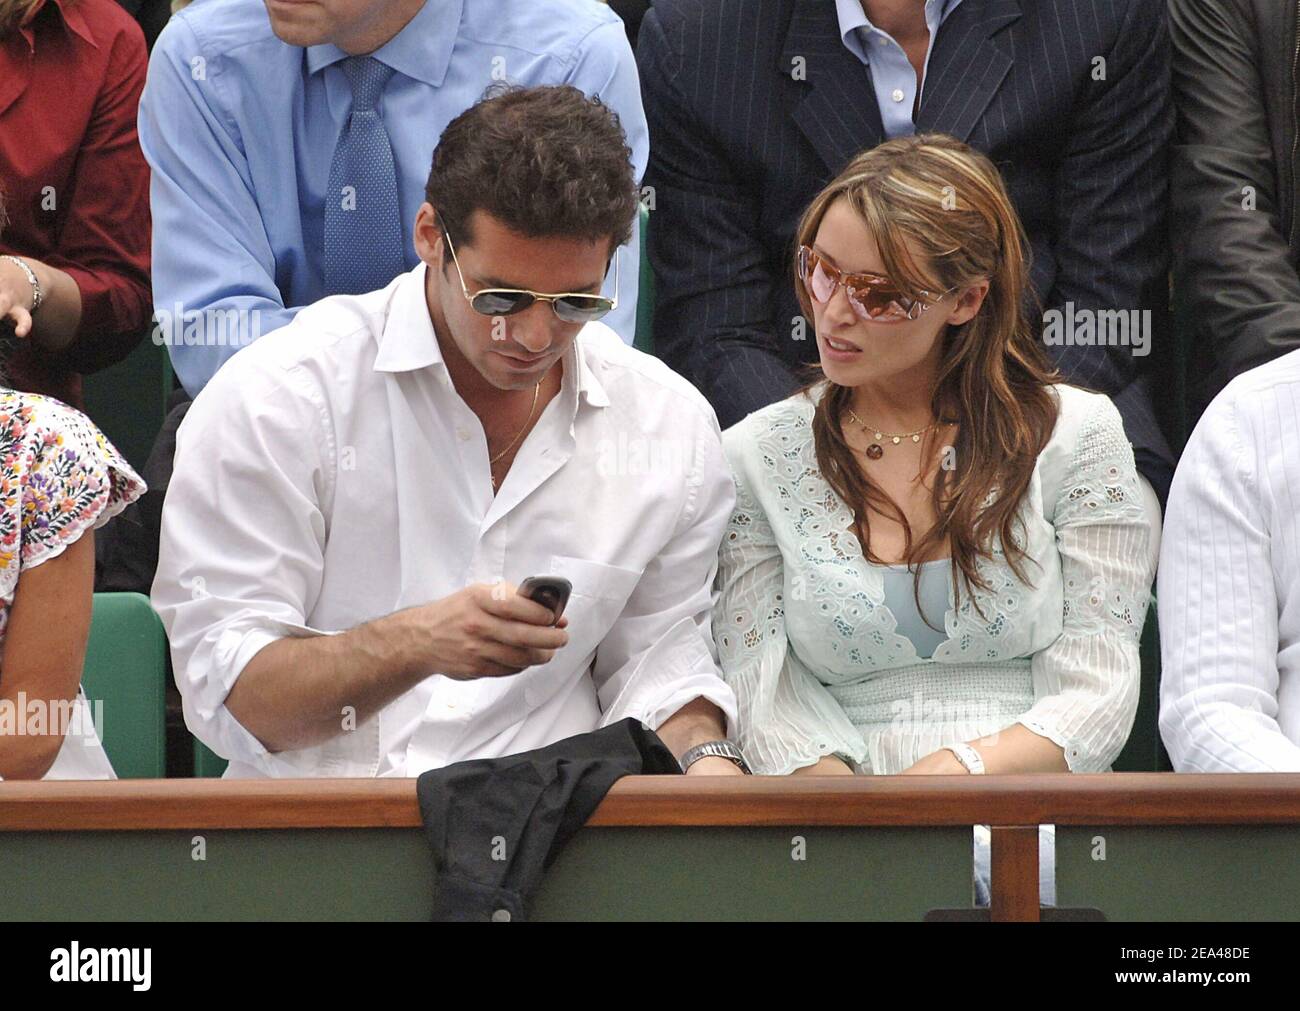 Australian singer Dannii Minogue and her boyfriend Jeremy Banster in the tribune of French tennis Open at Roland Garros in Paris, France on June 1, 2005. Photo by Gorassini-Zabulon/ABACA Stock Photo